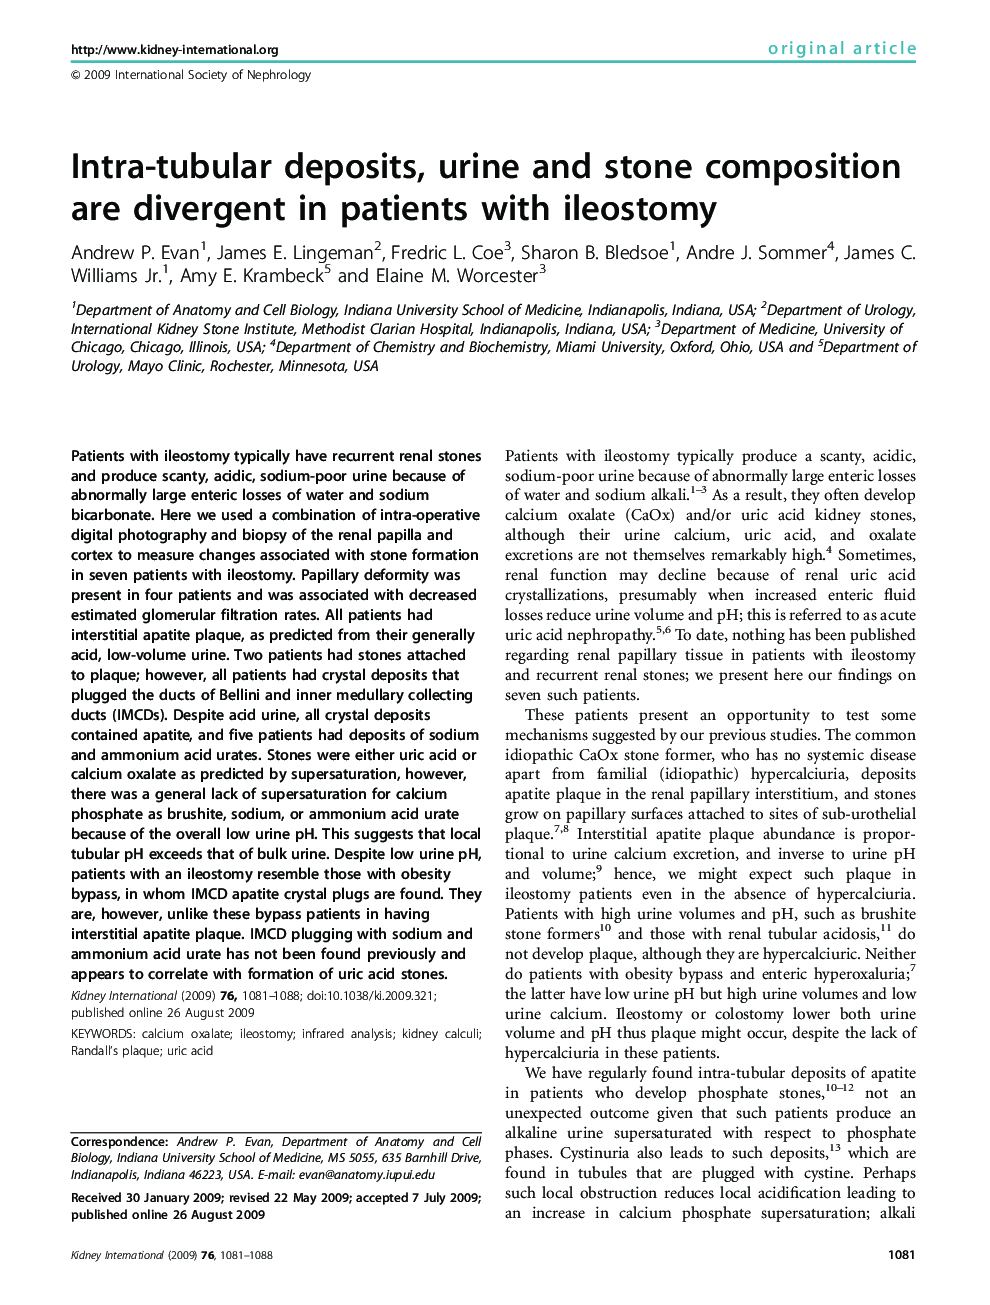 Intra-tubular deposits, urine and stone composition are divergent in patients with ileostomy